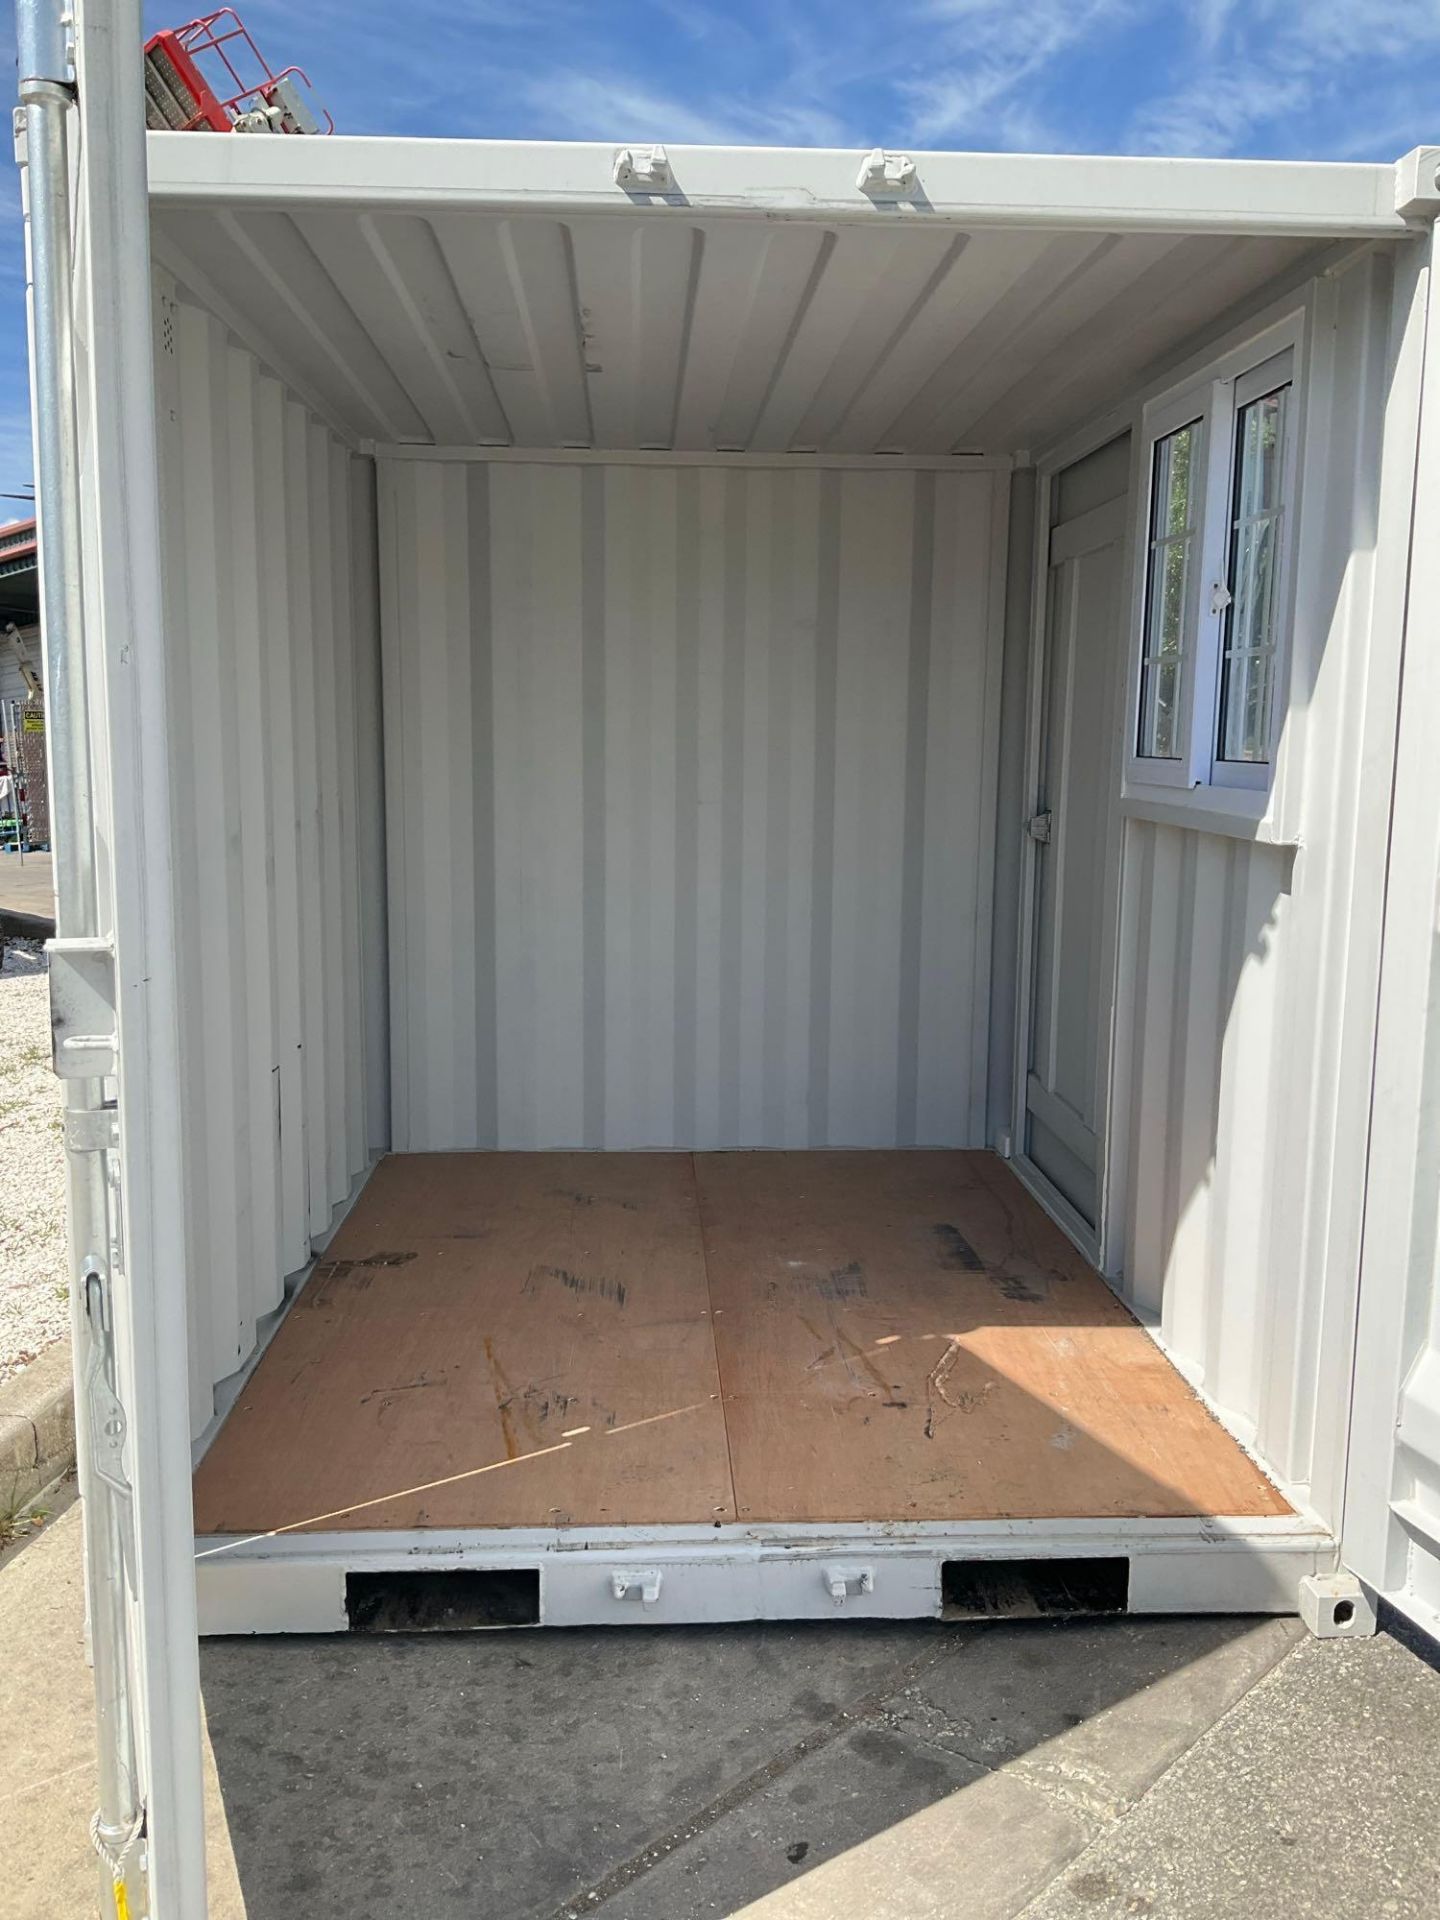 8' OFFICE / STORAGE CONTAINER, FORK POCKETS WITH SIDE DOOR ENTRANCE & SIDE WINDOW, APPROX 86'' TALL - Image 6 of 7